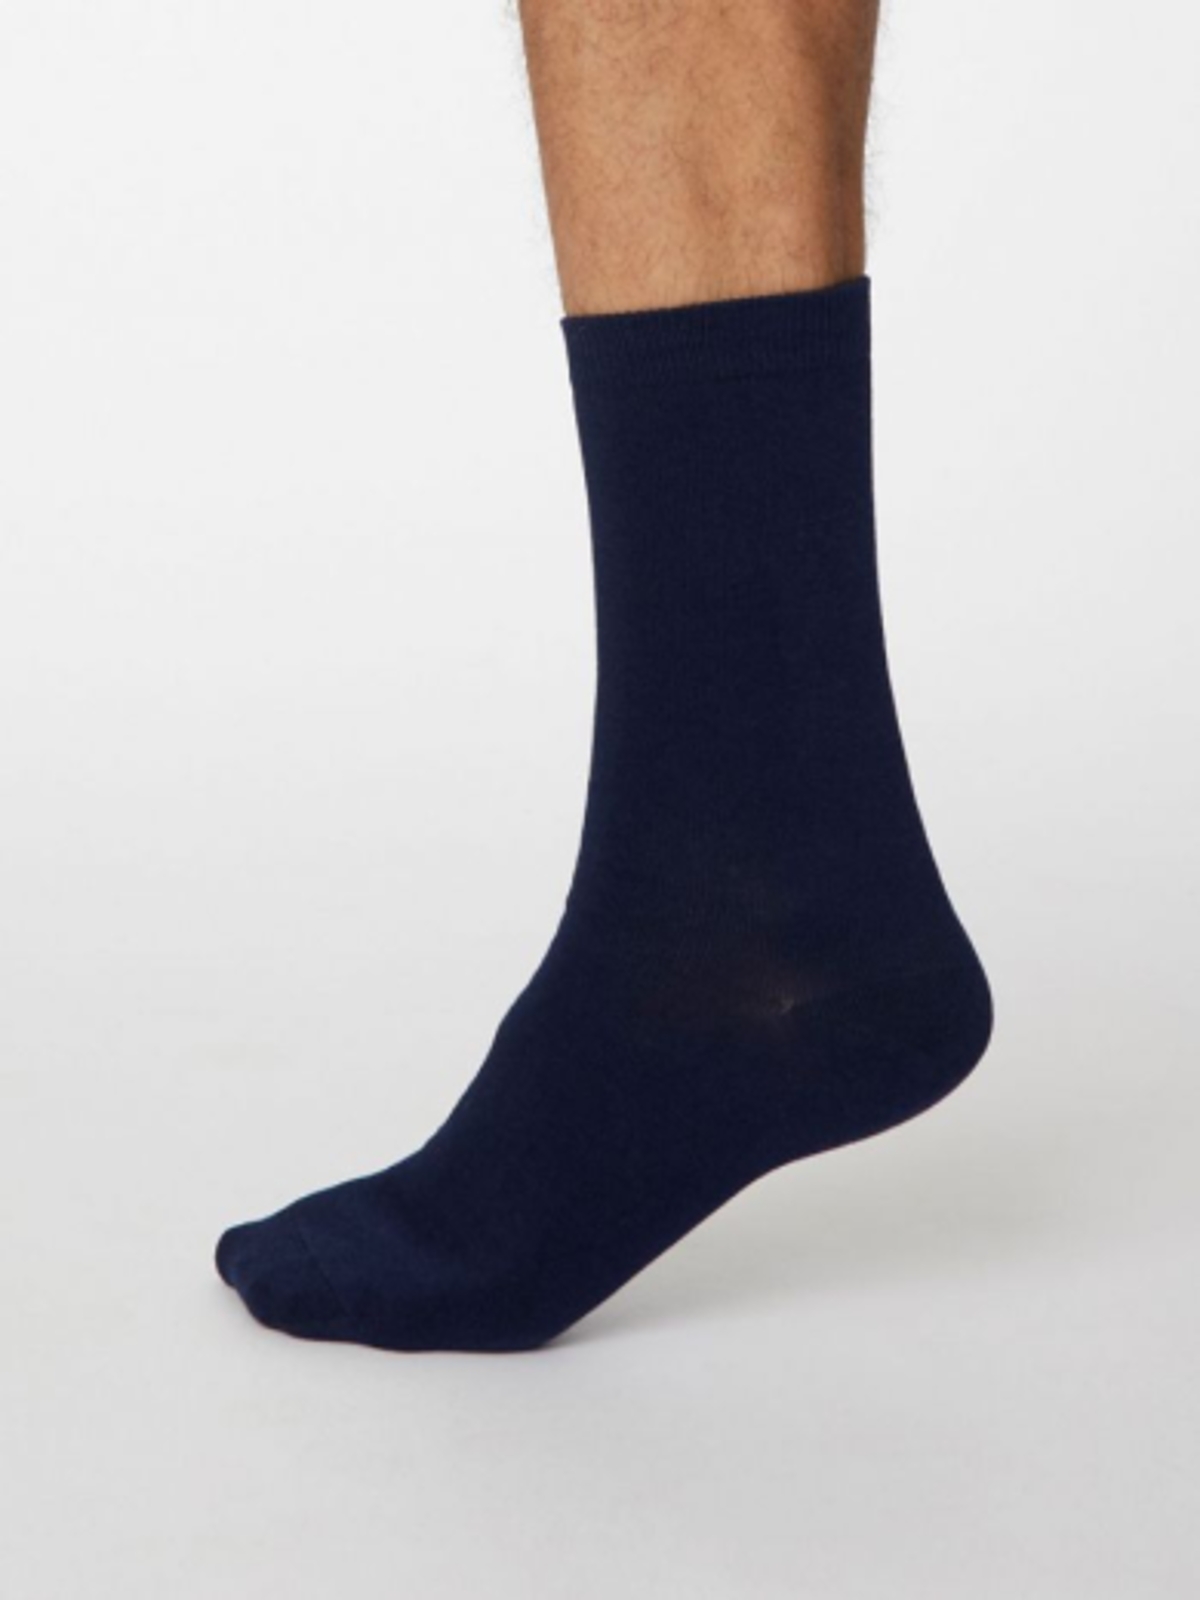 Gents Bamboo Socks - Navy - Whale and Dolphin Conservation Shop